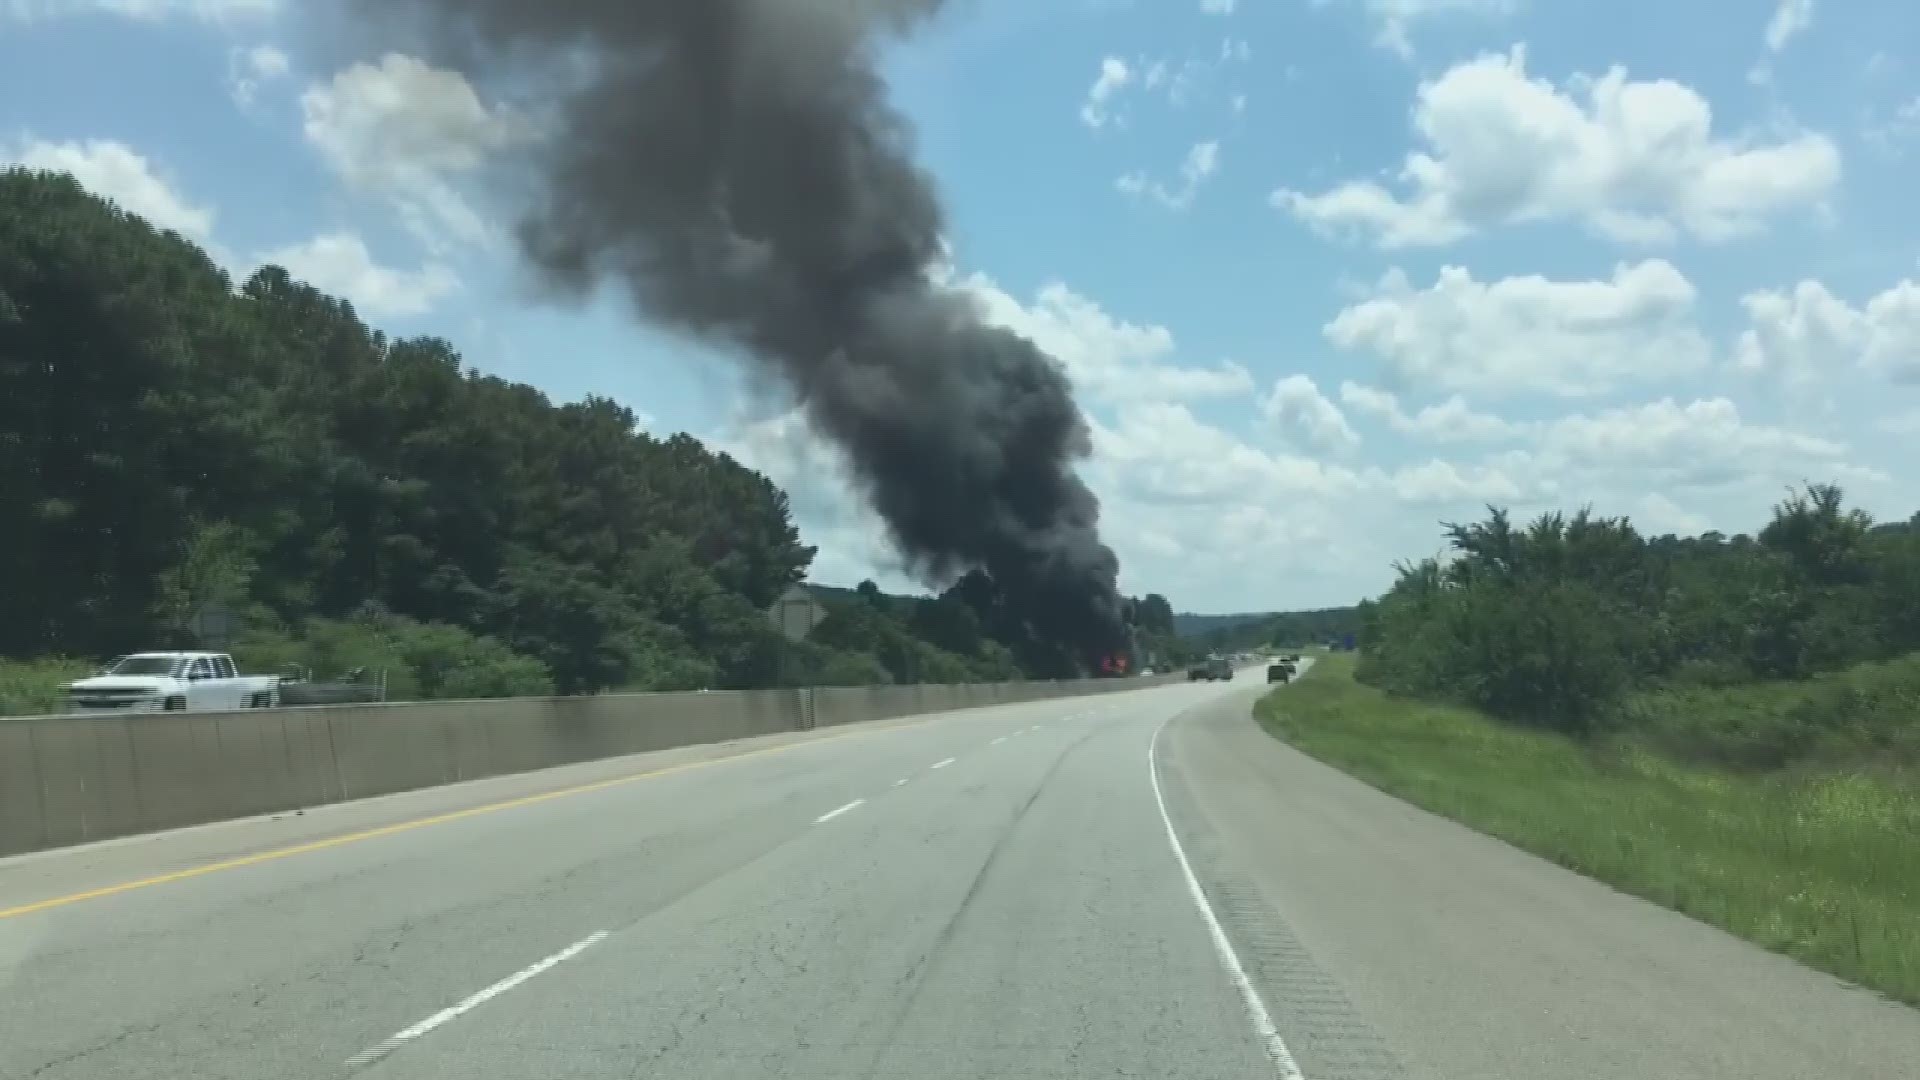 THV11's very own Laura Monteverdi was traveling near the fire just before 2 p.m. and was able to capture video.